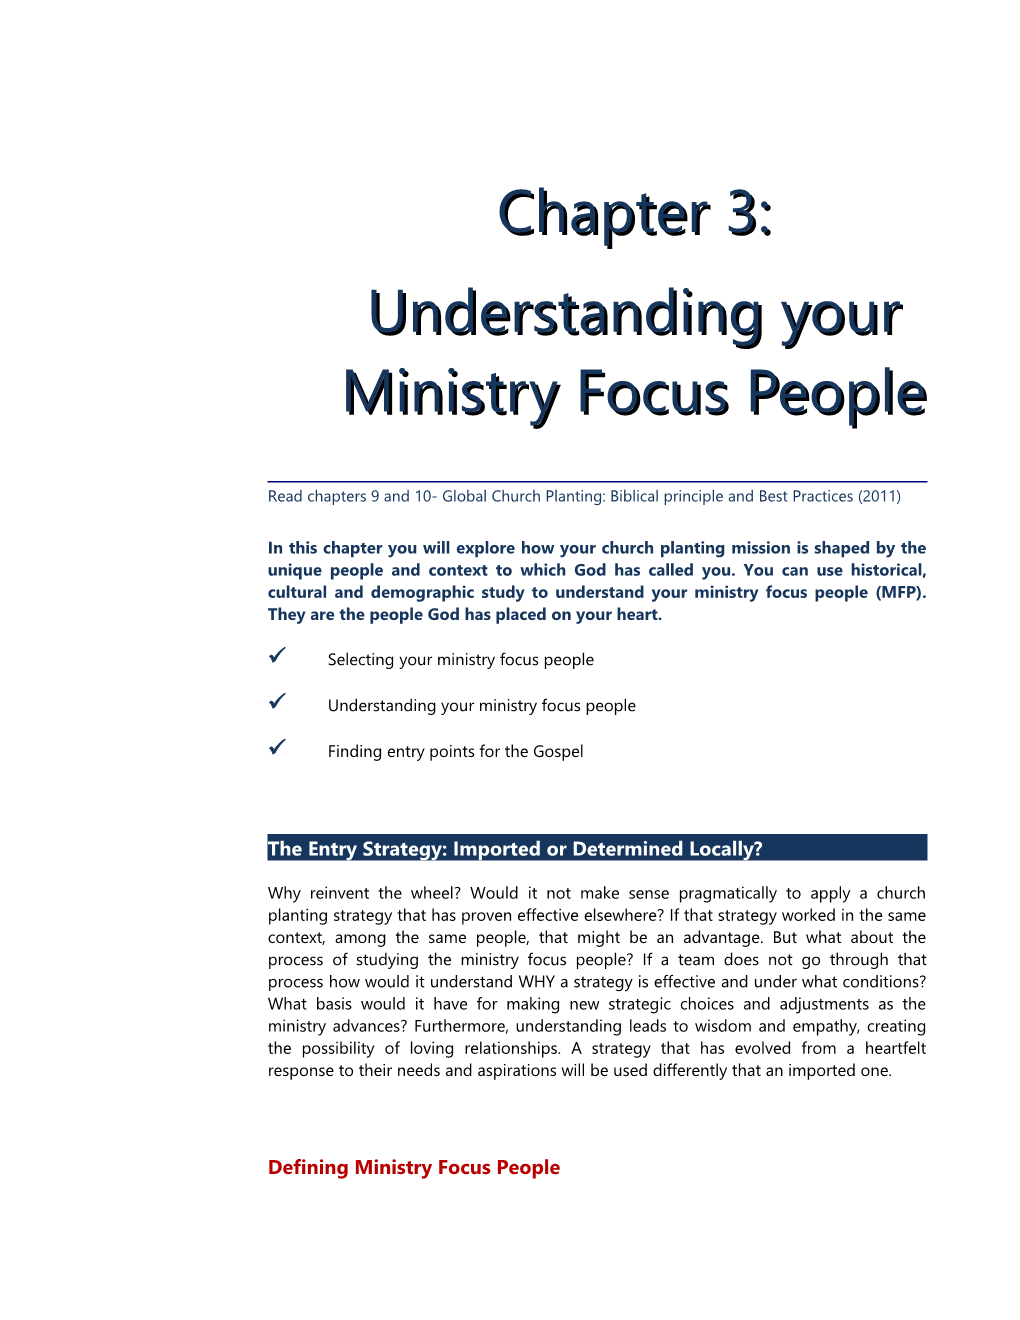 Church Planters Who Empower and Multiply -Chapter 3: Understanding Your Ministry Focus People